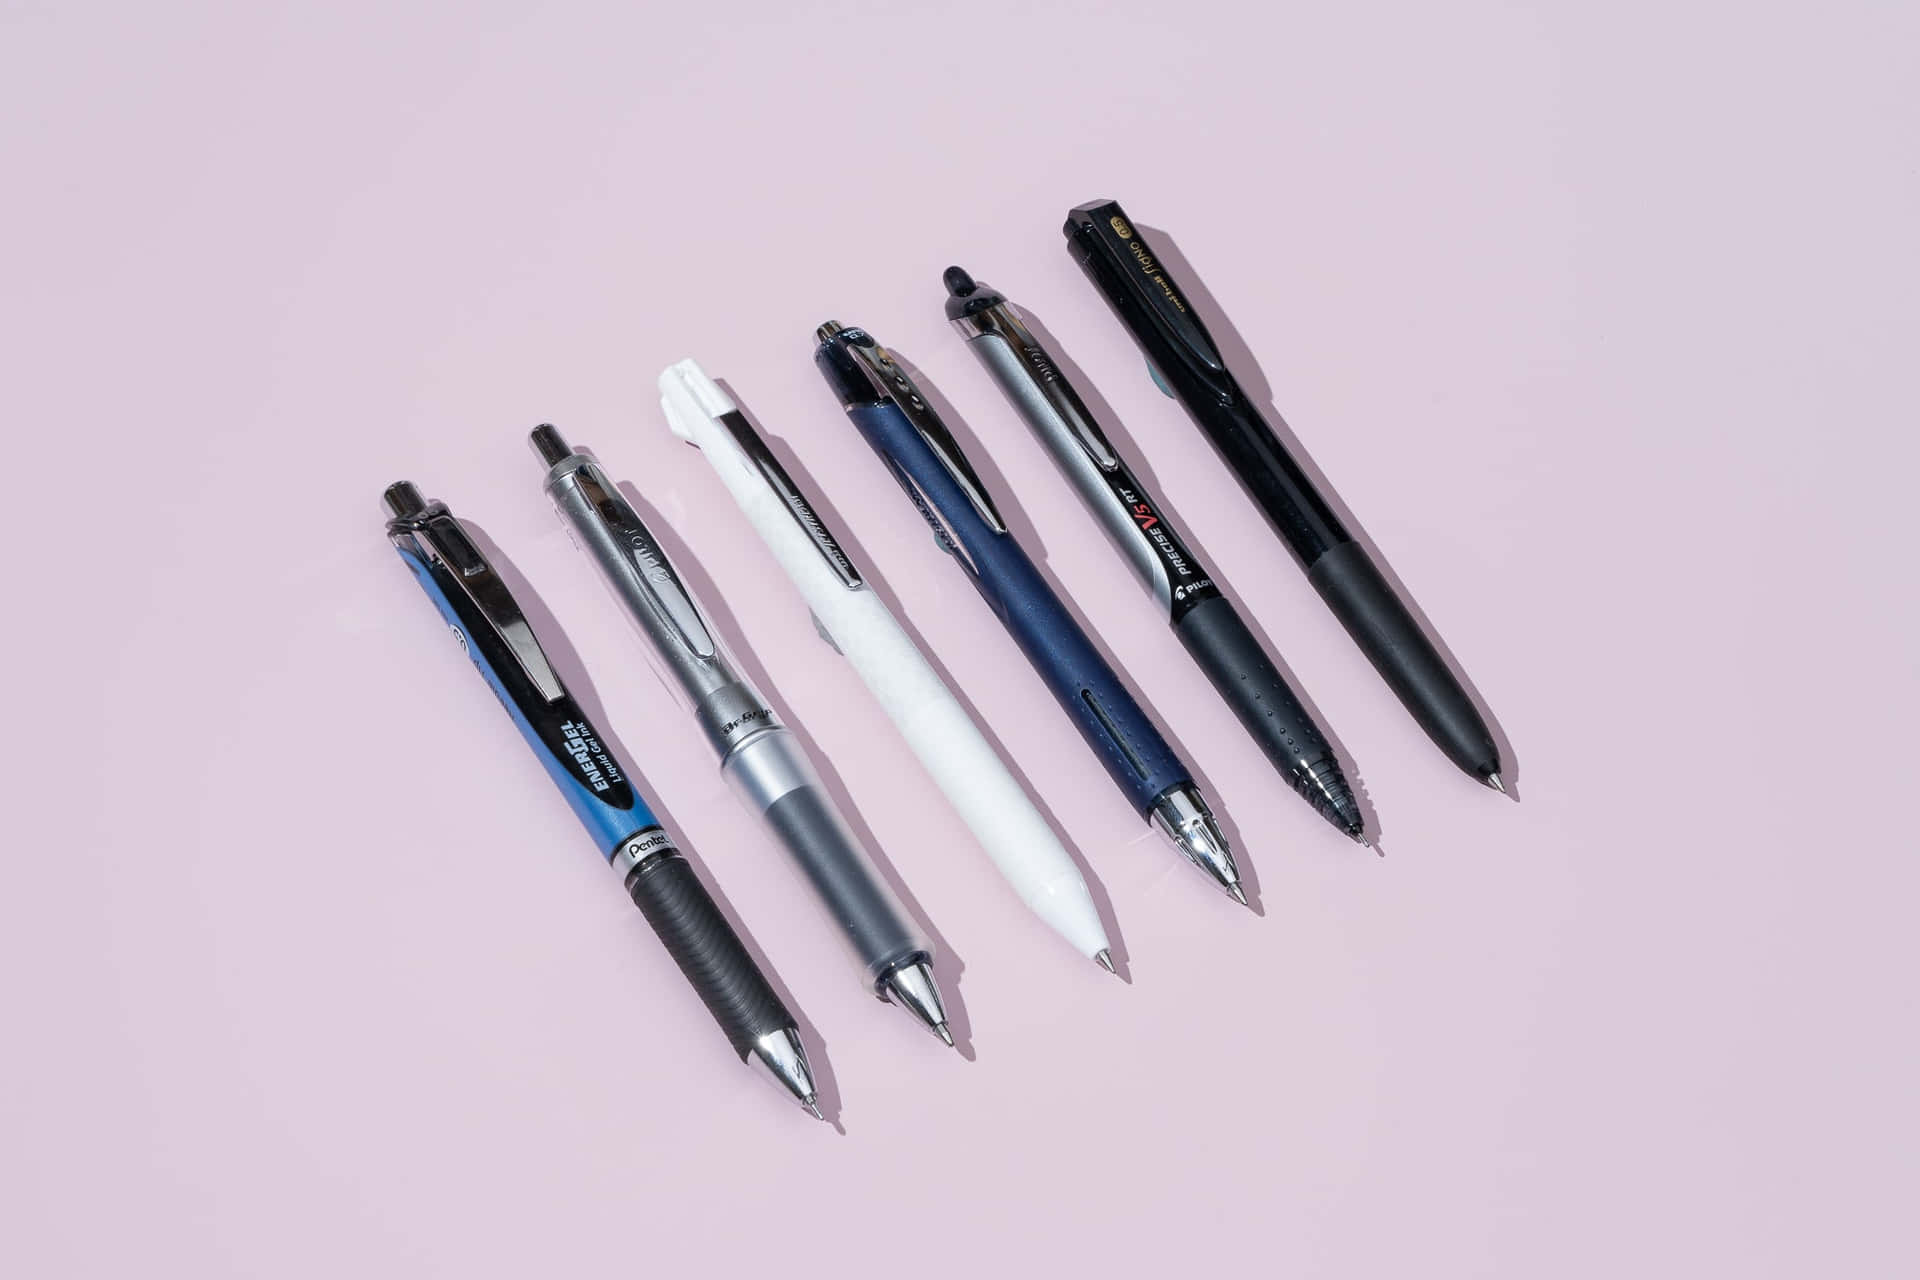 An array of colored pens against a white background.